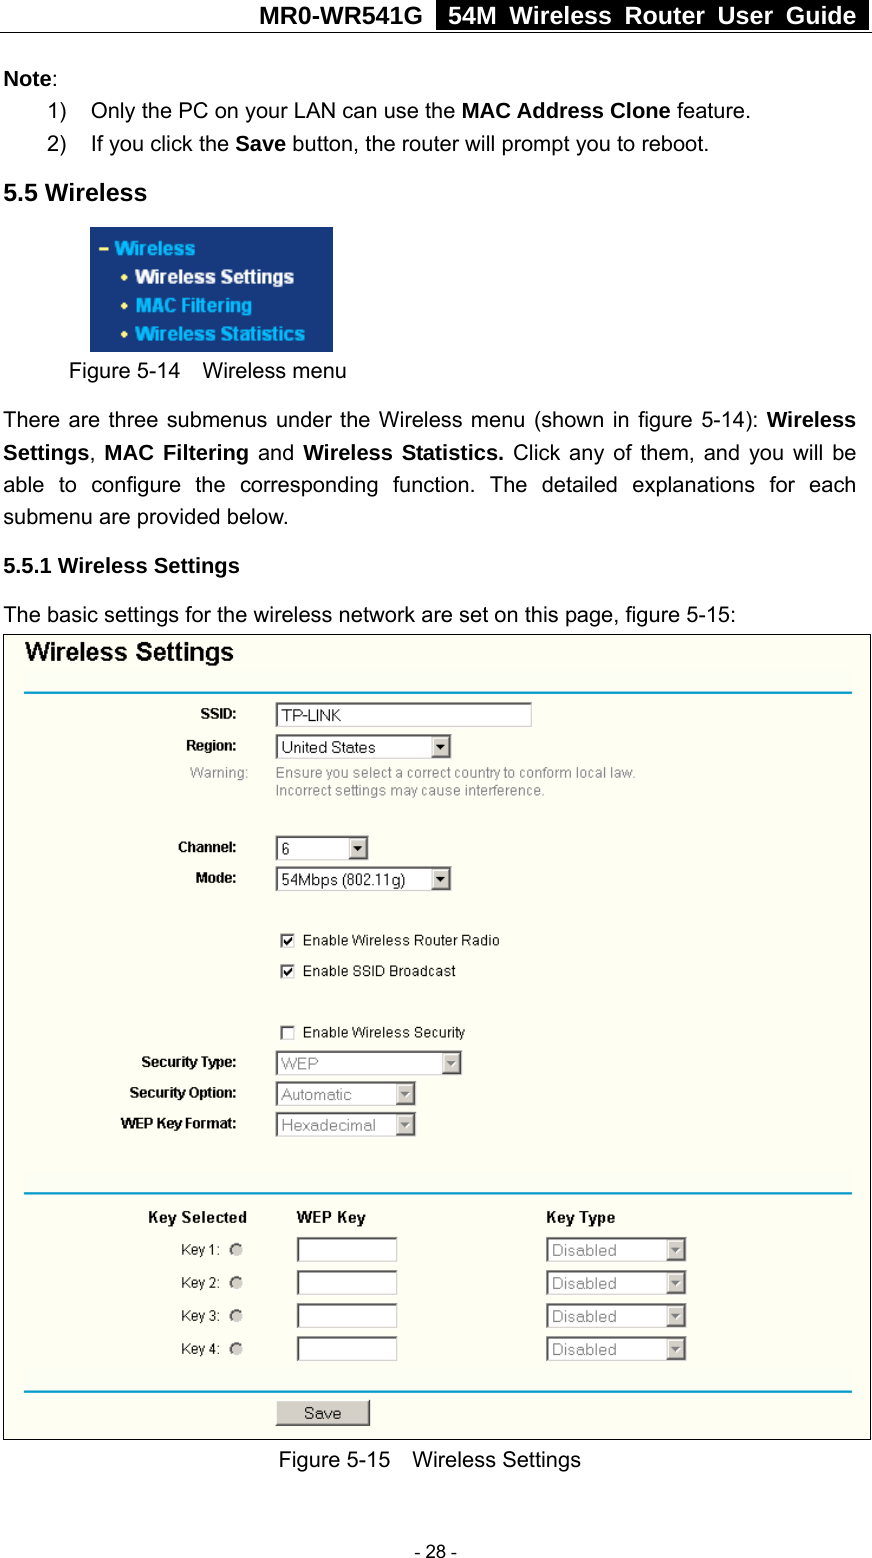 MR0-WR541G   54M Wireless Router User Guide  Note:  1)  Only the PC on your LAN can use the MAC Address Clone feature. 2)  If you click the Save button, the router will prompt you to reboot. 5.5 Wireless  Figure 5-14  Wireless menu There are three submenus under the Wireless menu (shown in figure 5-14): Wireless Settings, MAC Filtering and Wireless Statistics. Click any of them, and you will be able to configure the corresponding function. The detailed explanations for each submenu are provided below. 5.5.1 Wireless Settings The basic settings for the wireless network are set on this page, figure 5-15:  Figure 5-15  Wireless Settings  - 28 - 